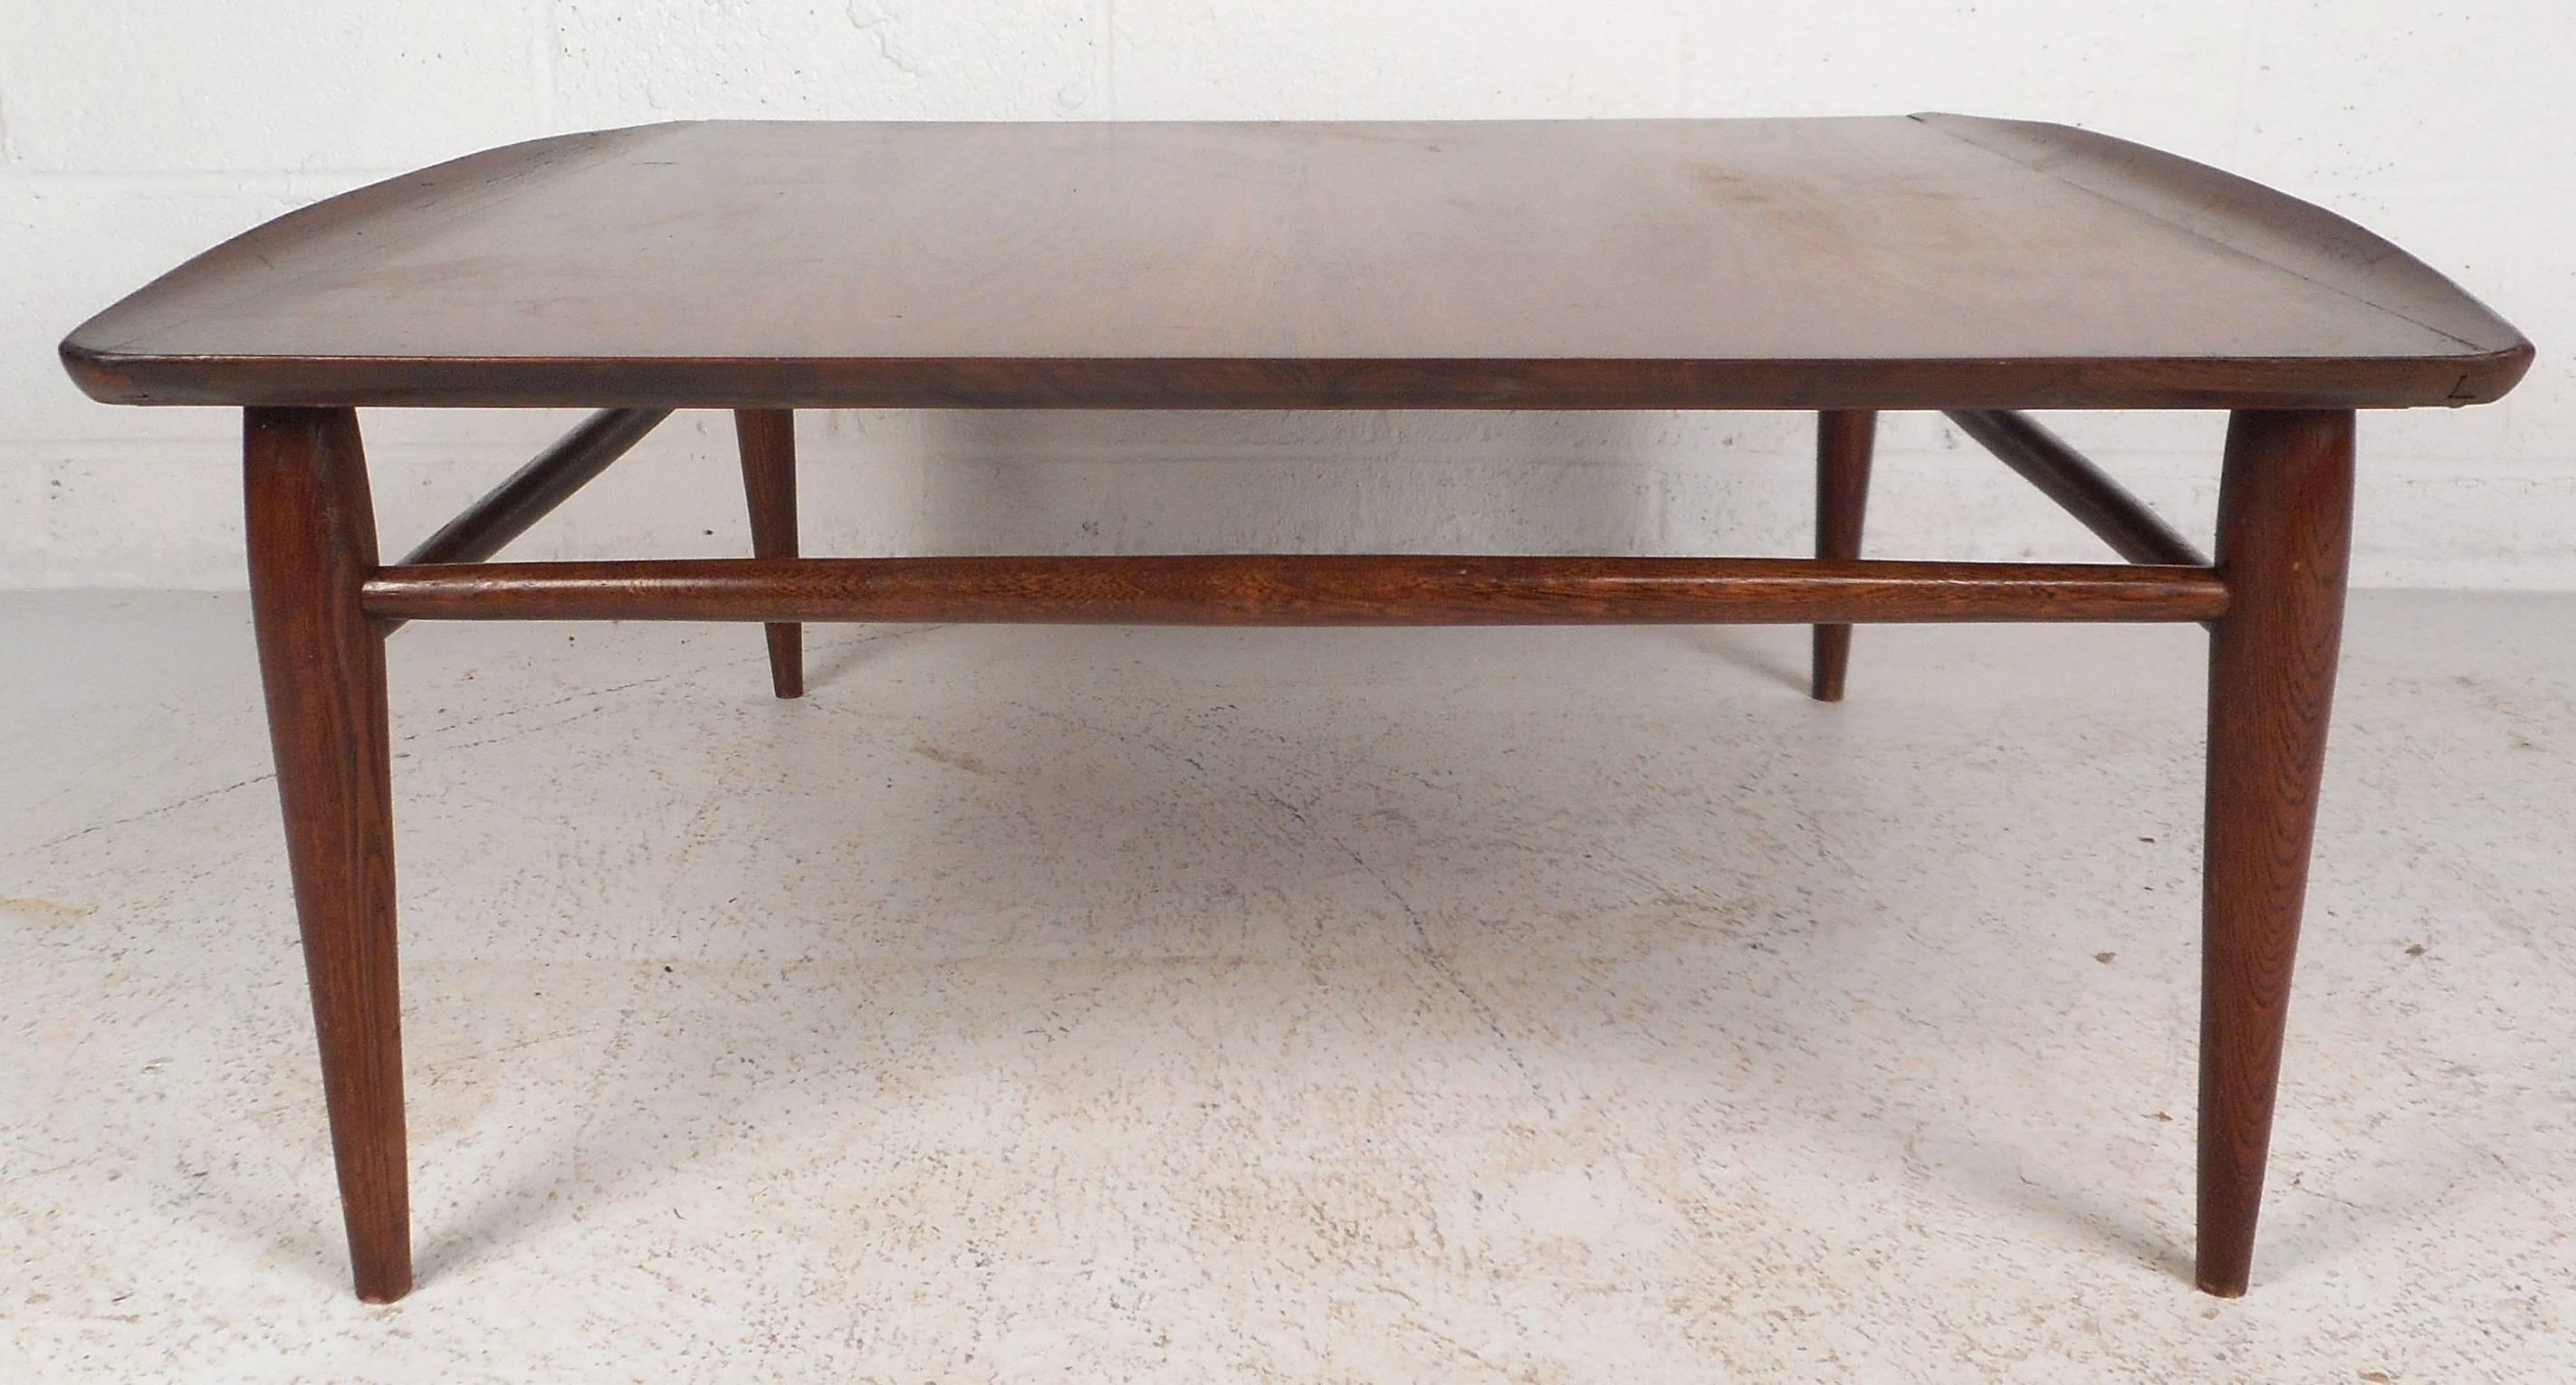 Beautiful vintage modern coffee table features unique raised edges and tapered legs. Sleek design with stretchers between each leg ensuring sturdiness without sacrificing style. The gorgeous walnut wood grain is sure to compliment any modern